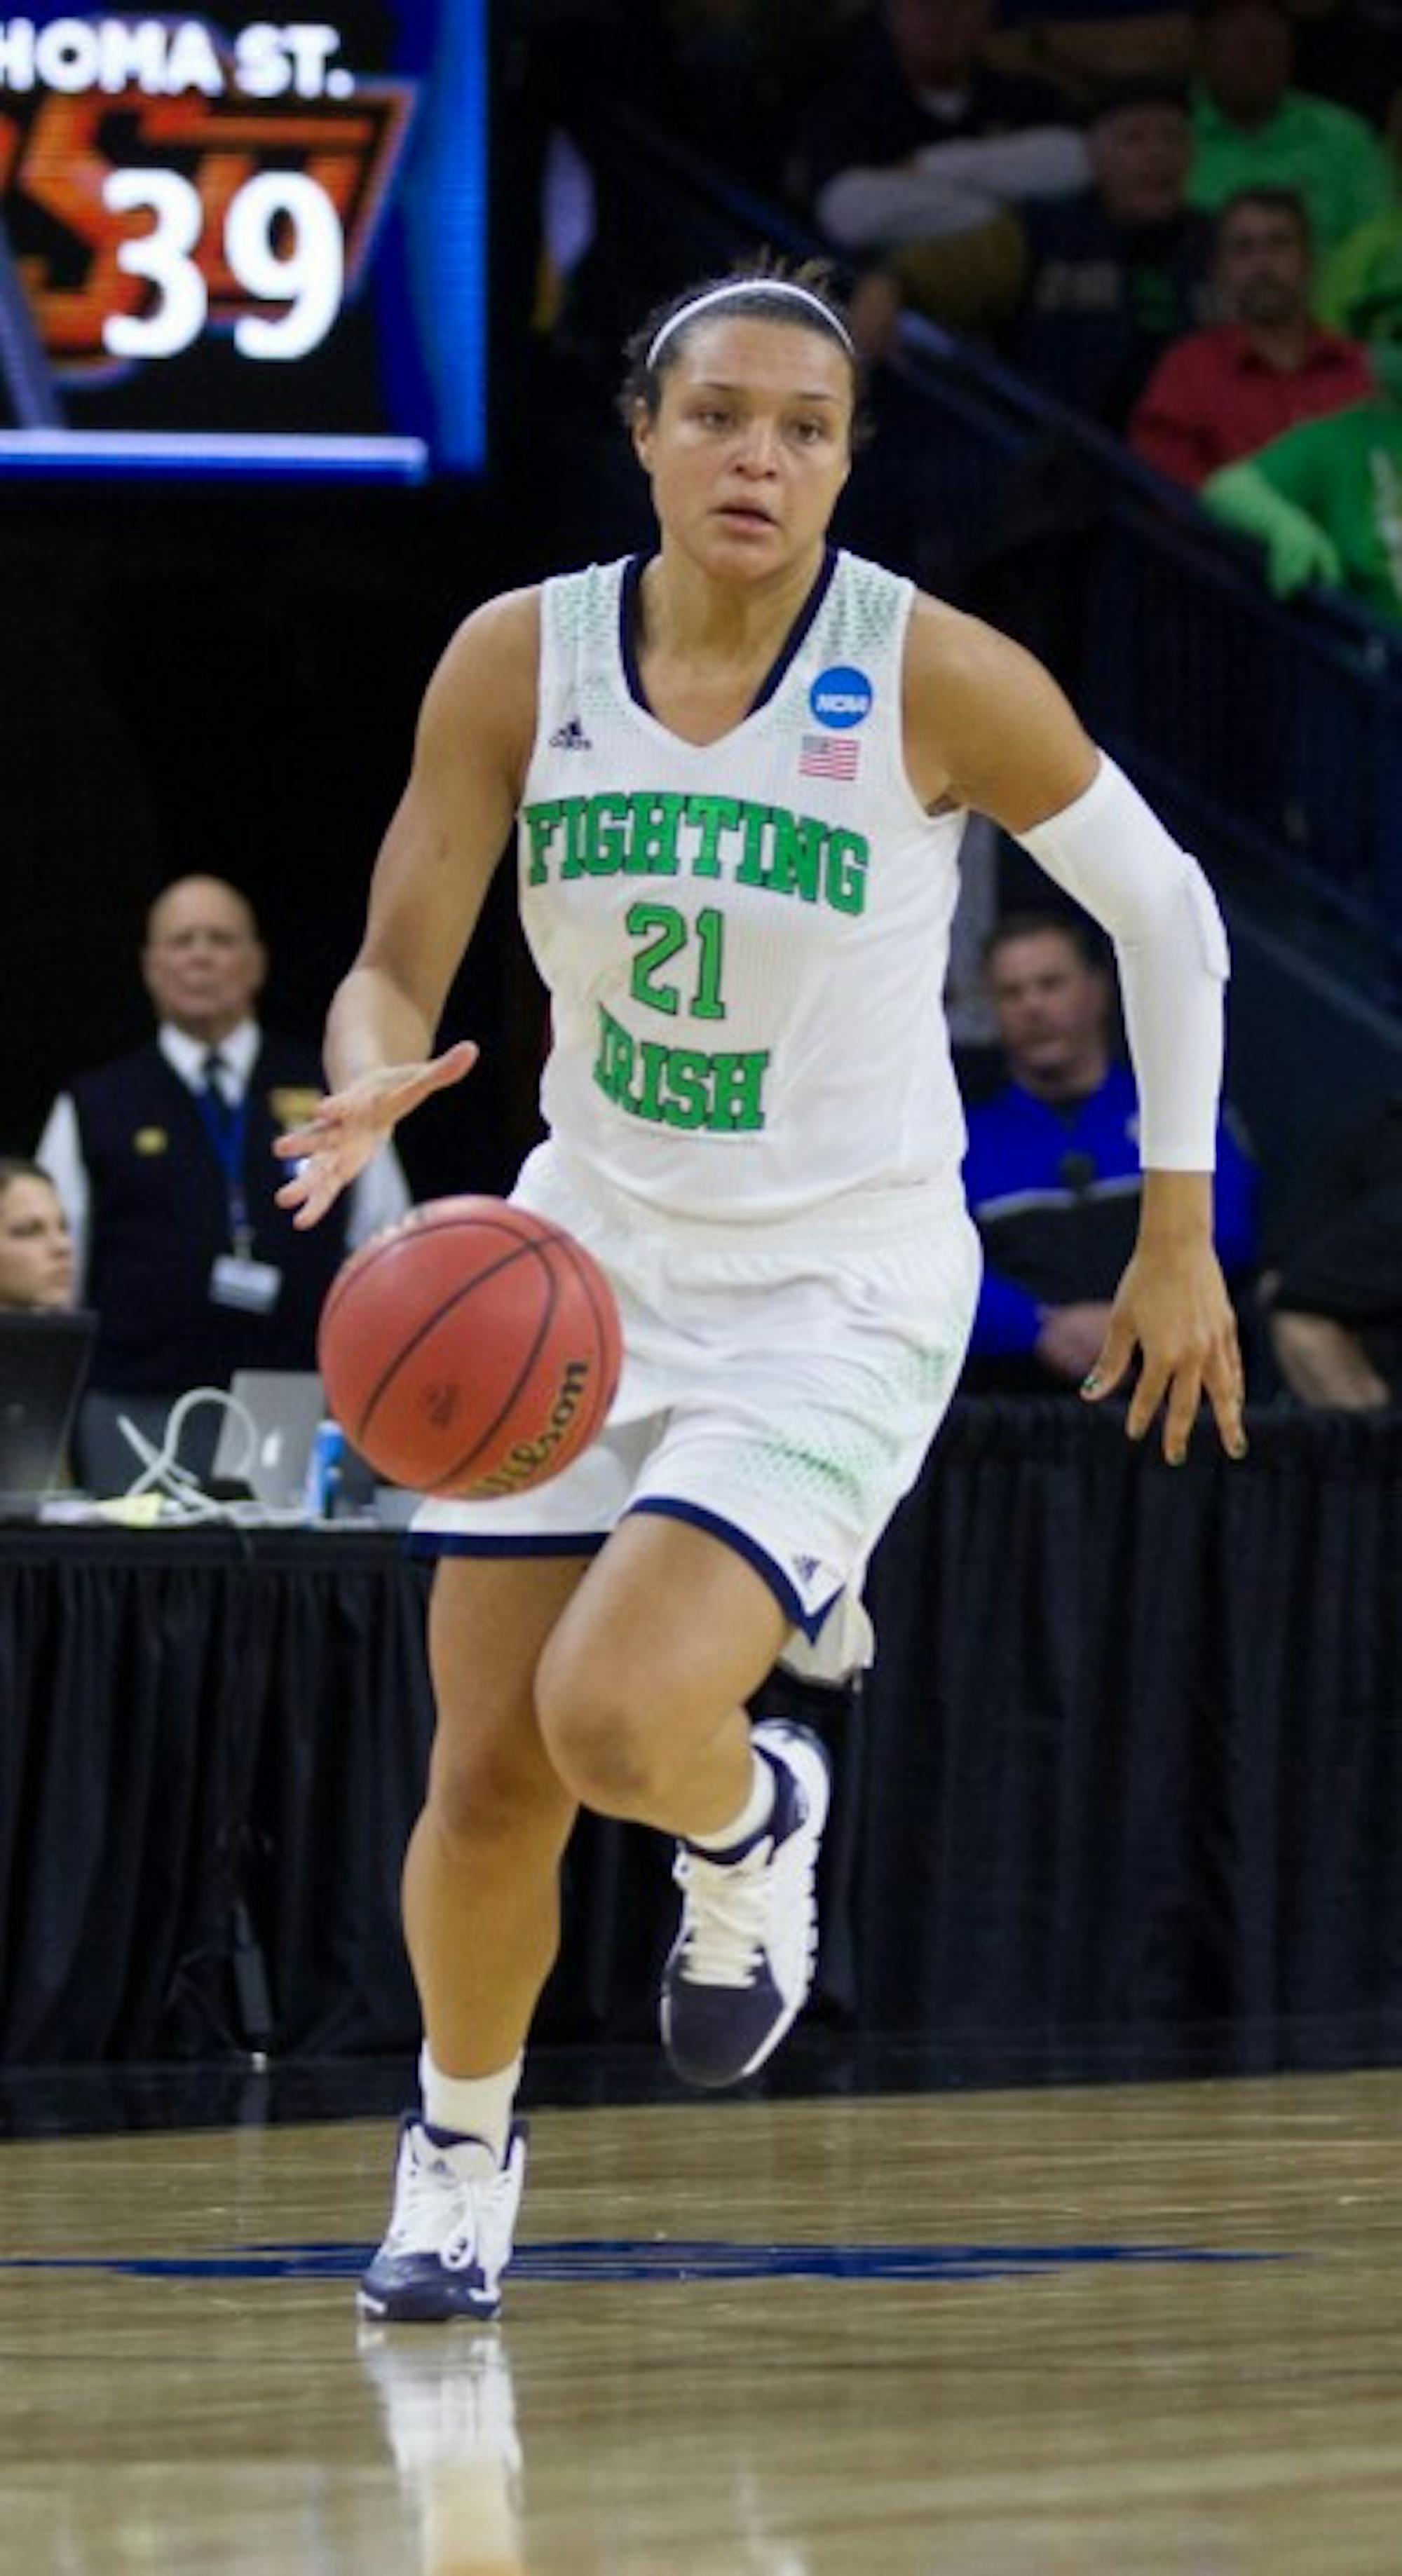 Irish senior guard Kayla McBride takes the ball upcourt during Saturday's Sweet 16 victory over Oklahoma State, 89-72. McBride posted 18 points, five rebounds and four assists in the victory